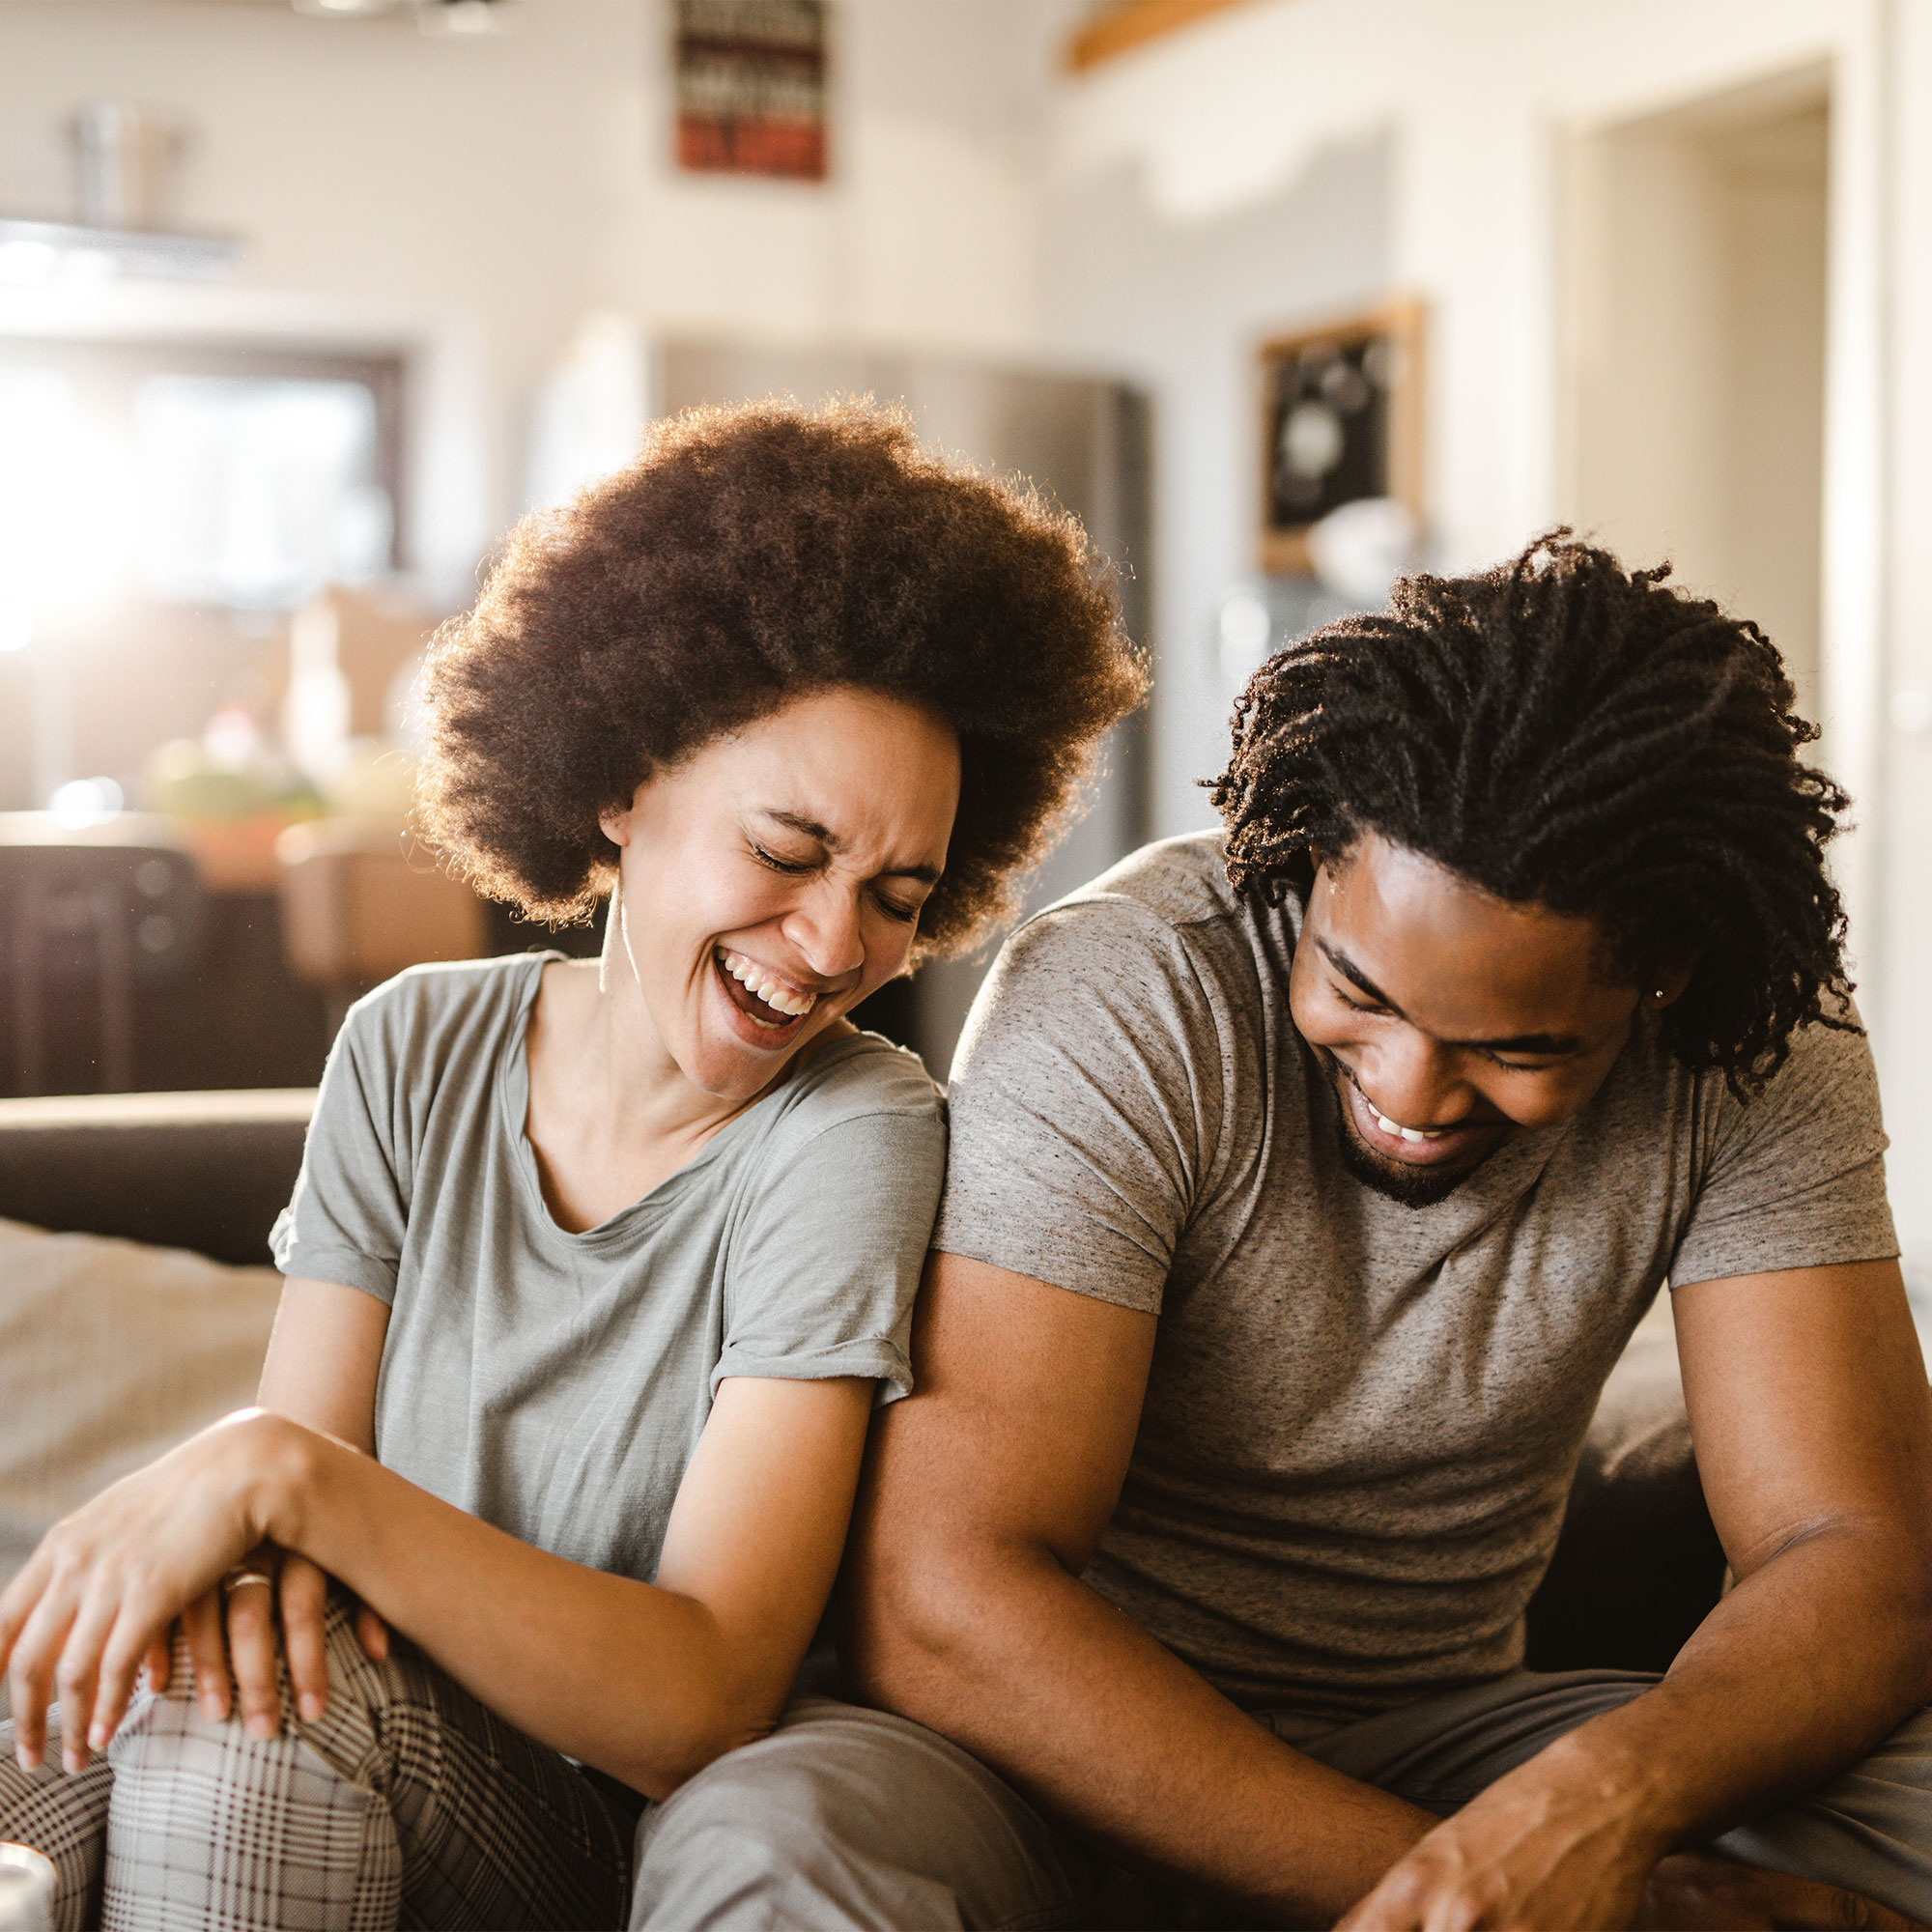 How Crohns Disease Impacts Your Relationship